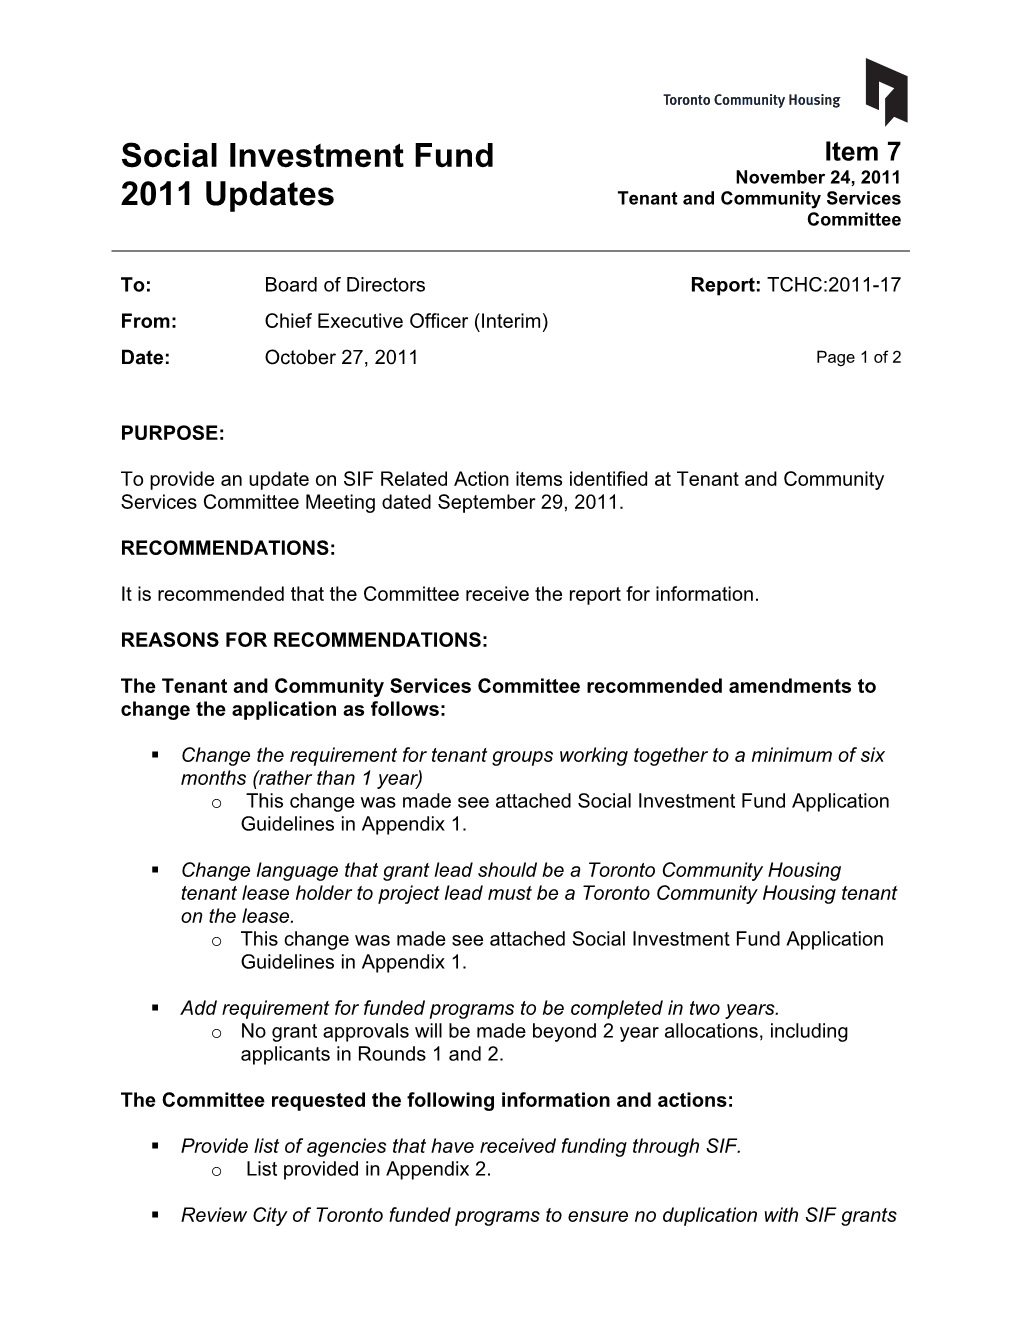 Social Investment Fund 2011 Updates Report: TCHC:2011-17 Page 2 of 2